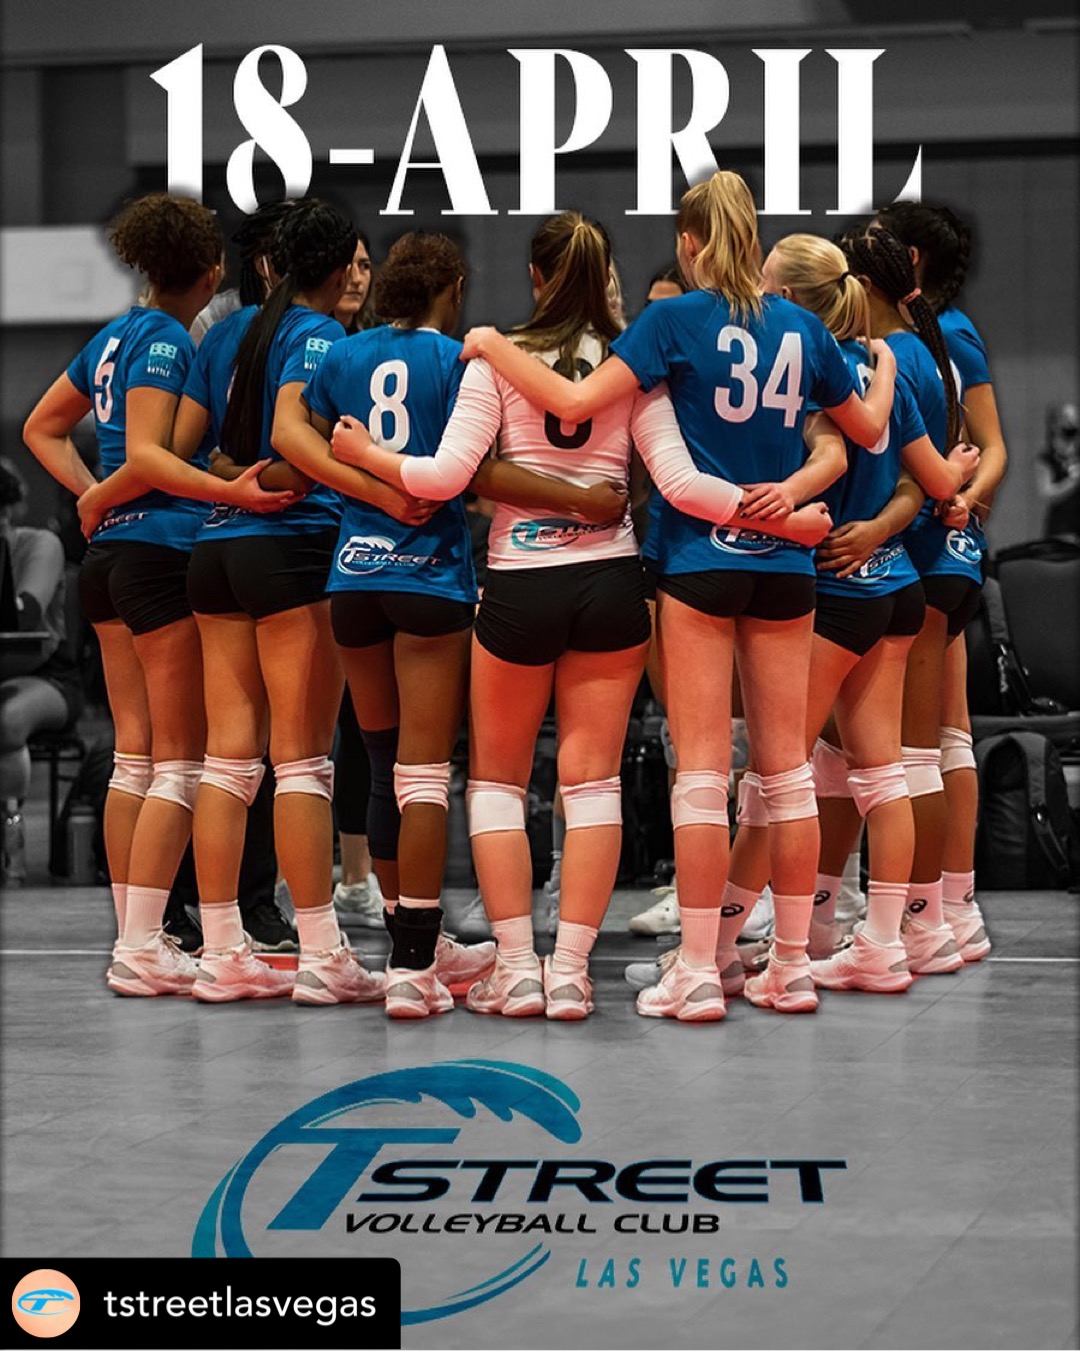 After a five year hiatus from club coaching I decided for the 2021-2022  girls club season to join the California based Tstreet Volleyball club which has opened a Vegas branch this season headed by Foothill Varsity coach, and Tstreet Vegas club director, Chris Sisson.

I am coaching the Tstreet Last Vegas 18s again for the 2022 - 2023 season.